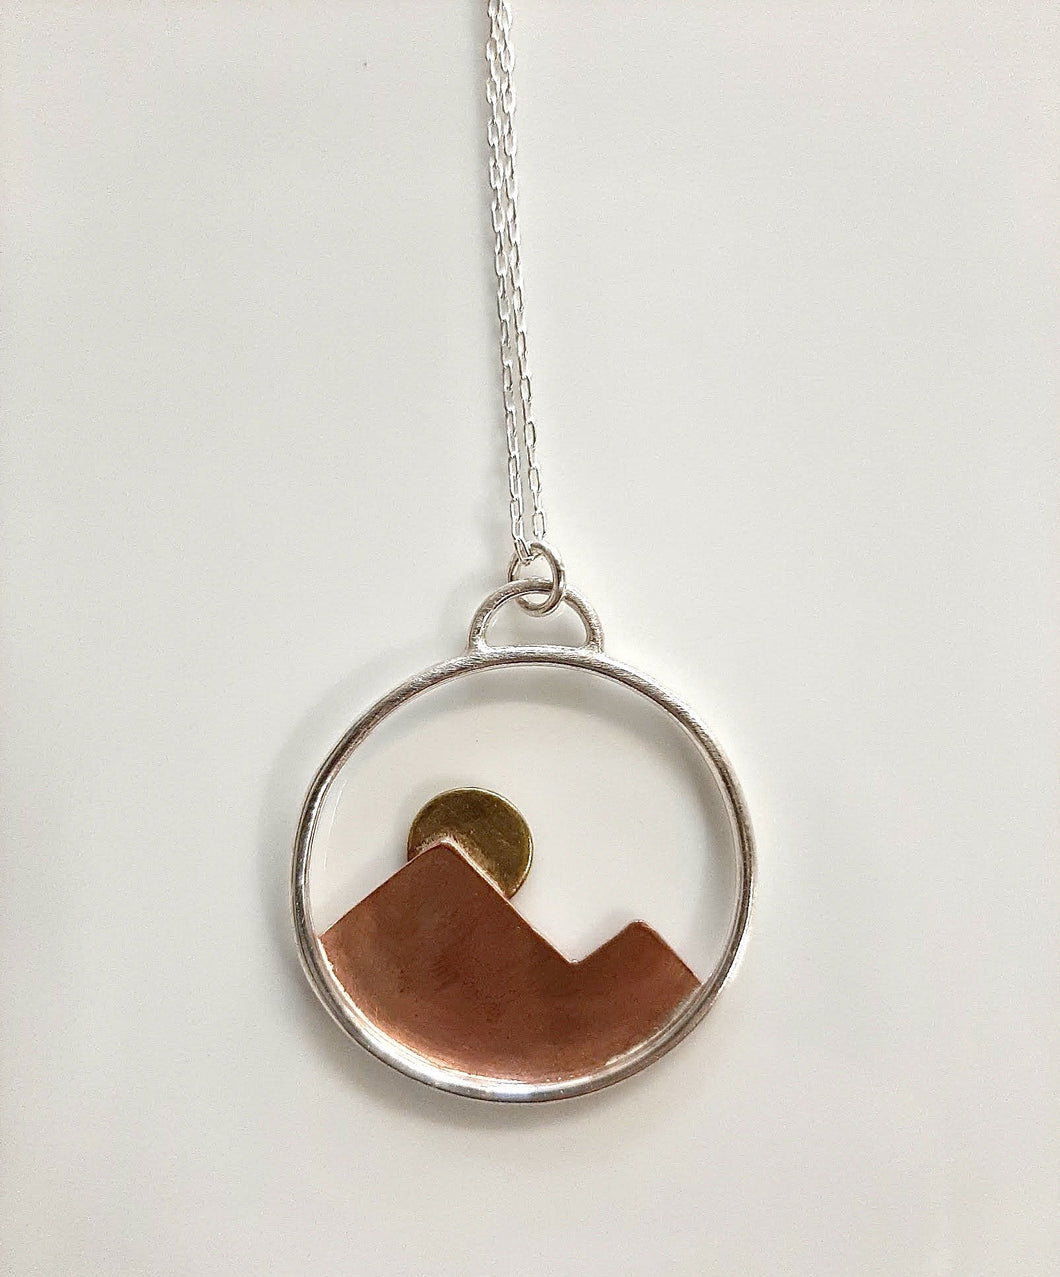 Amanda Moran  Designs Handmade Sterling Silver, Copper and Brass Alpenglow Necklace